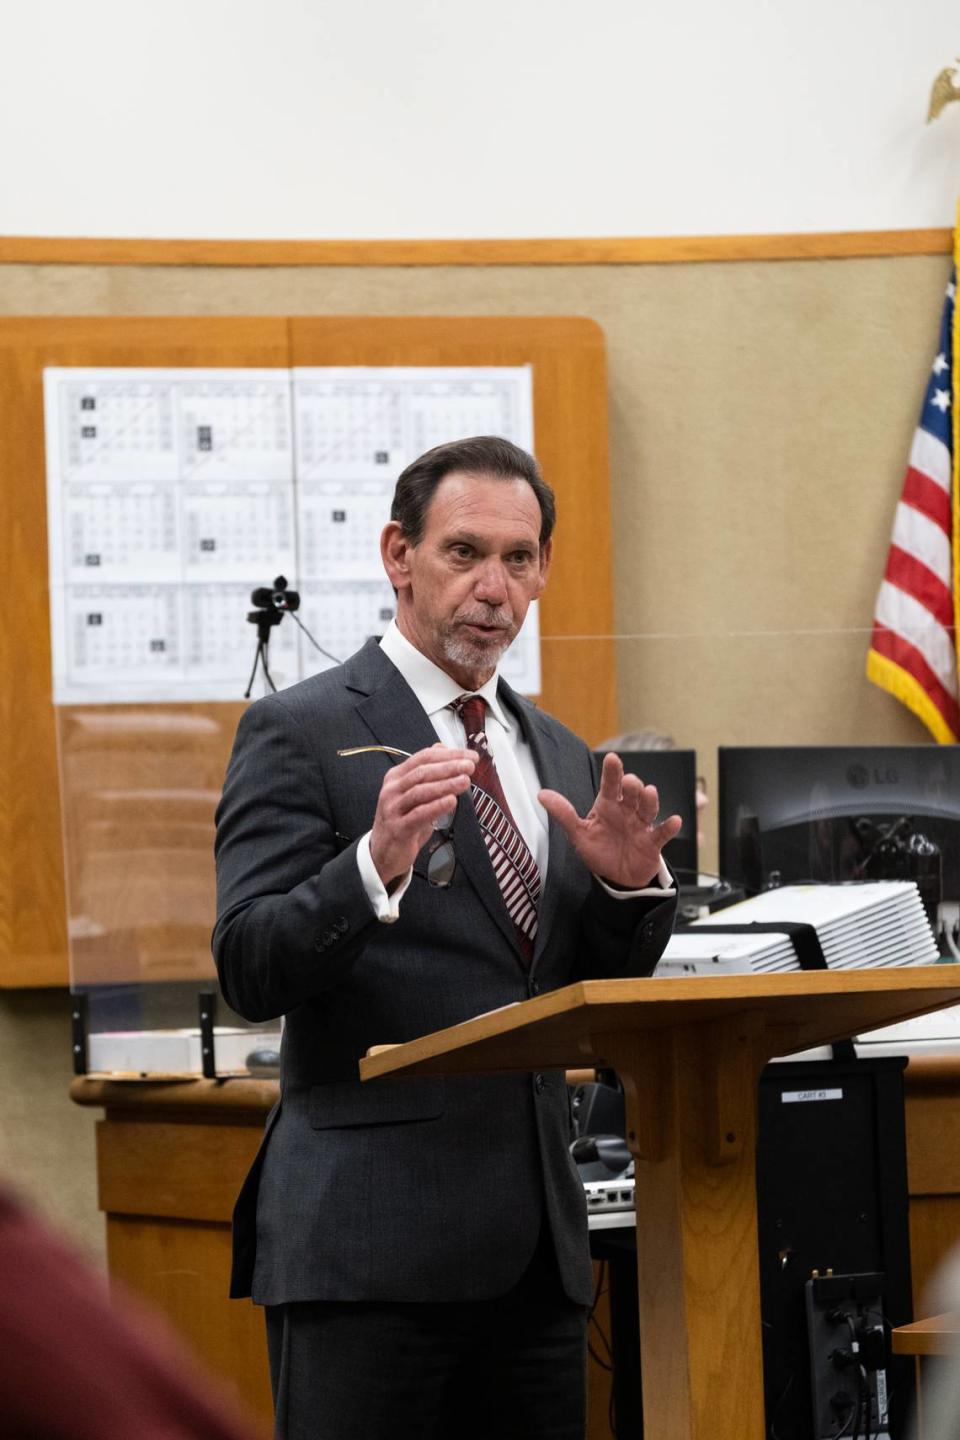 Defense attorney Ray Allen gives closing statements in the case against his client, Stephen Deflaun, in San Luis Obispo Superior Court on Apr. 18, 2023.